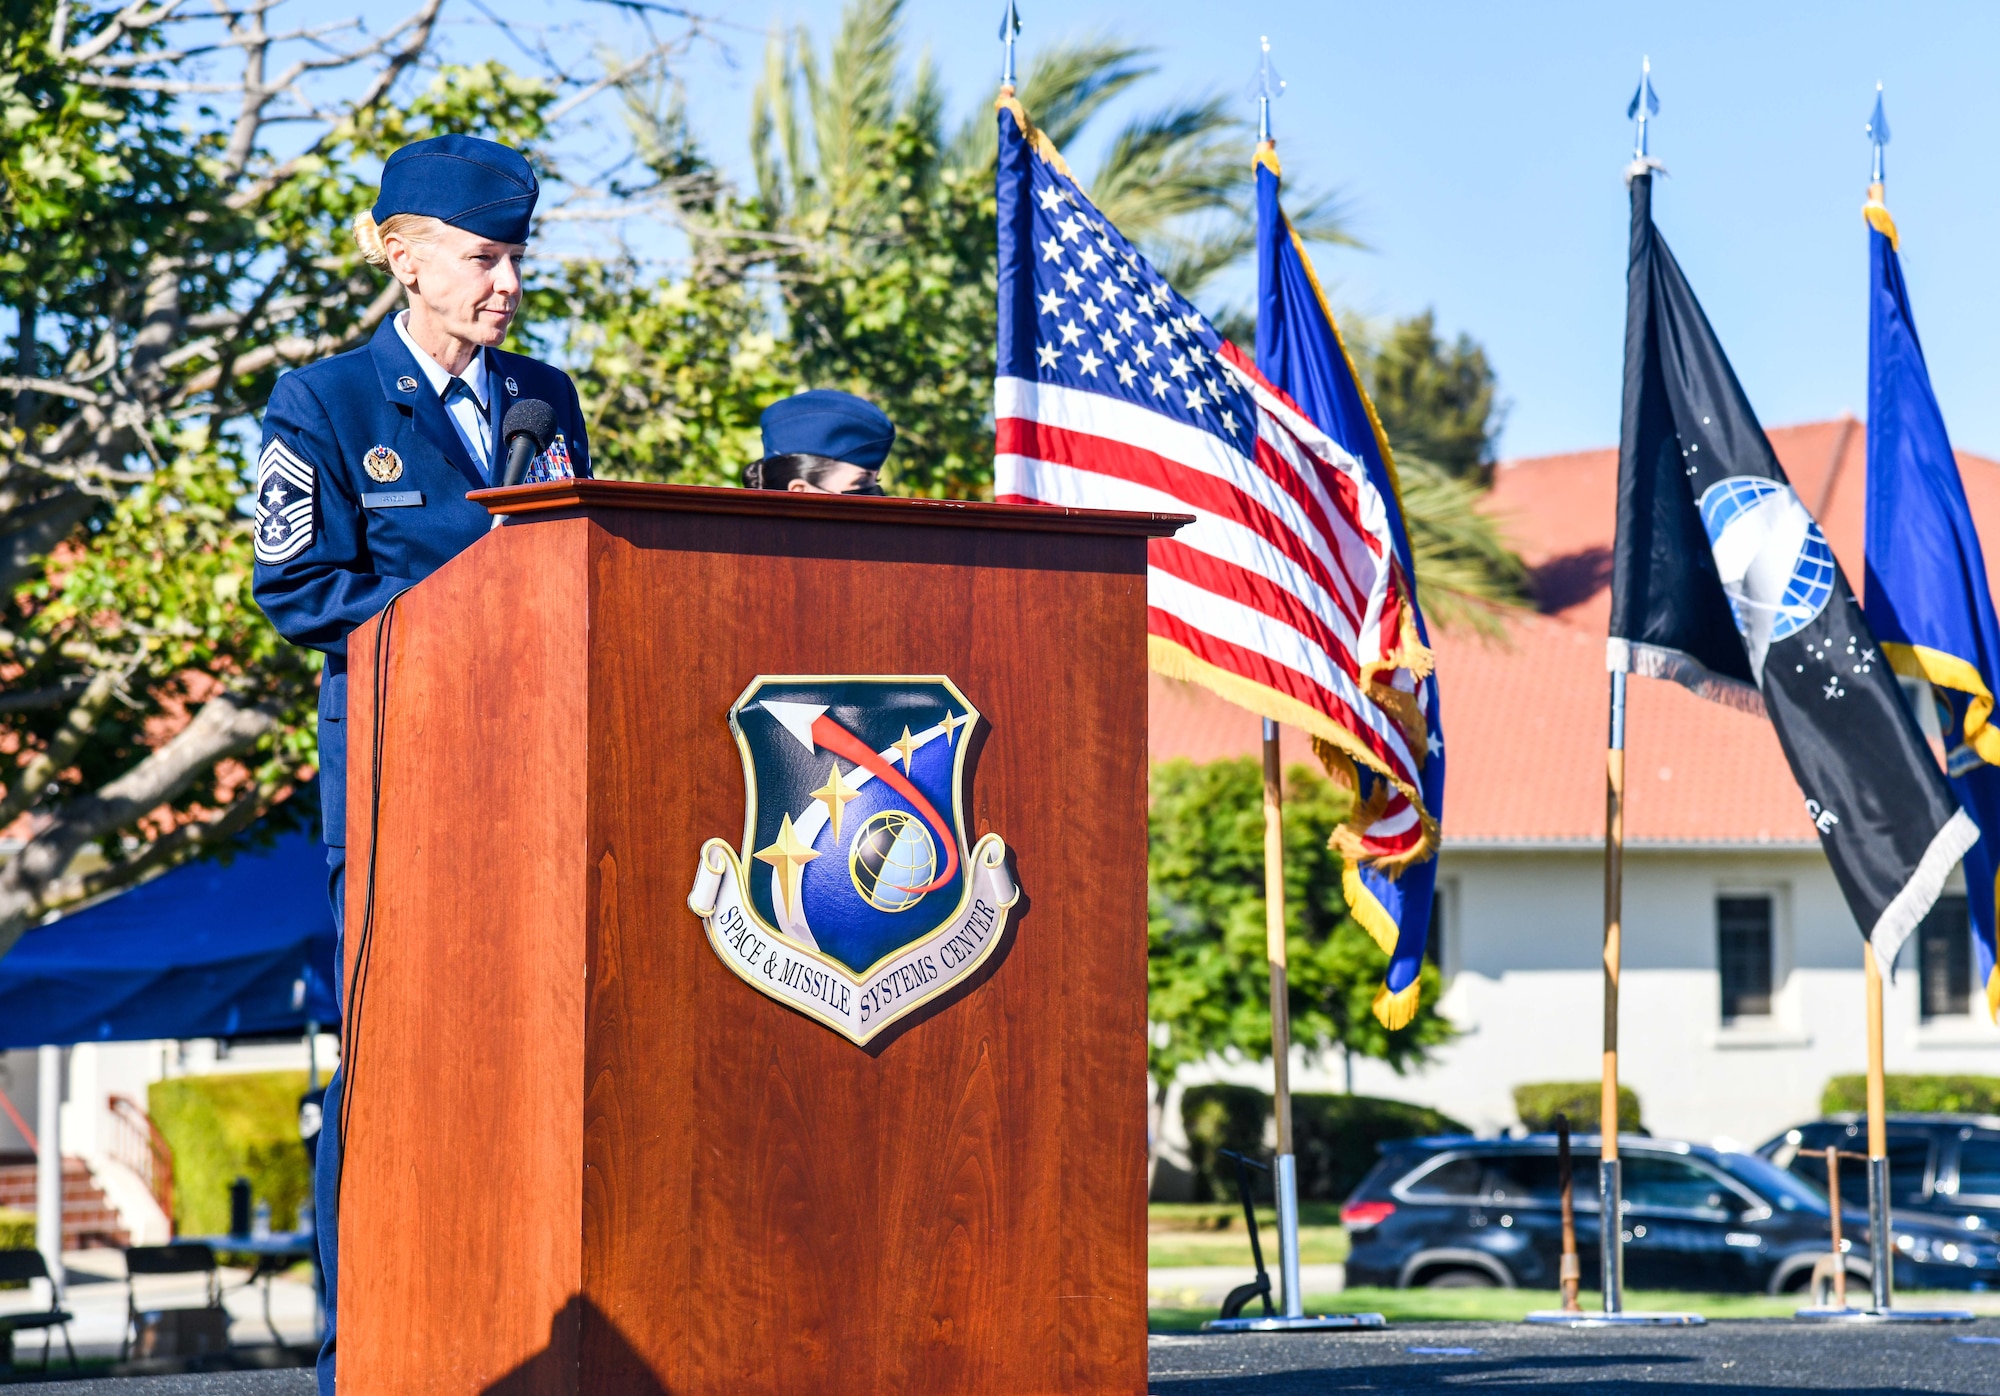 U.S. Air Force Chief Master Sgt. Lisa Arnold, Space and Missile Systems Center command chief, addresses graduates during the first-ever Airman Leadership School graduation ceremony on Ft. MacArthur, California, Sept. 22, 2020. This marked a significant milestone for Los Angeles AFB as this was the first time the installation hosted the Enlisted Professional Military Education course. (U.S. Space Force photo by Van Ha)